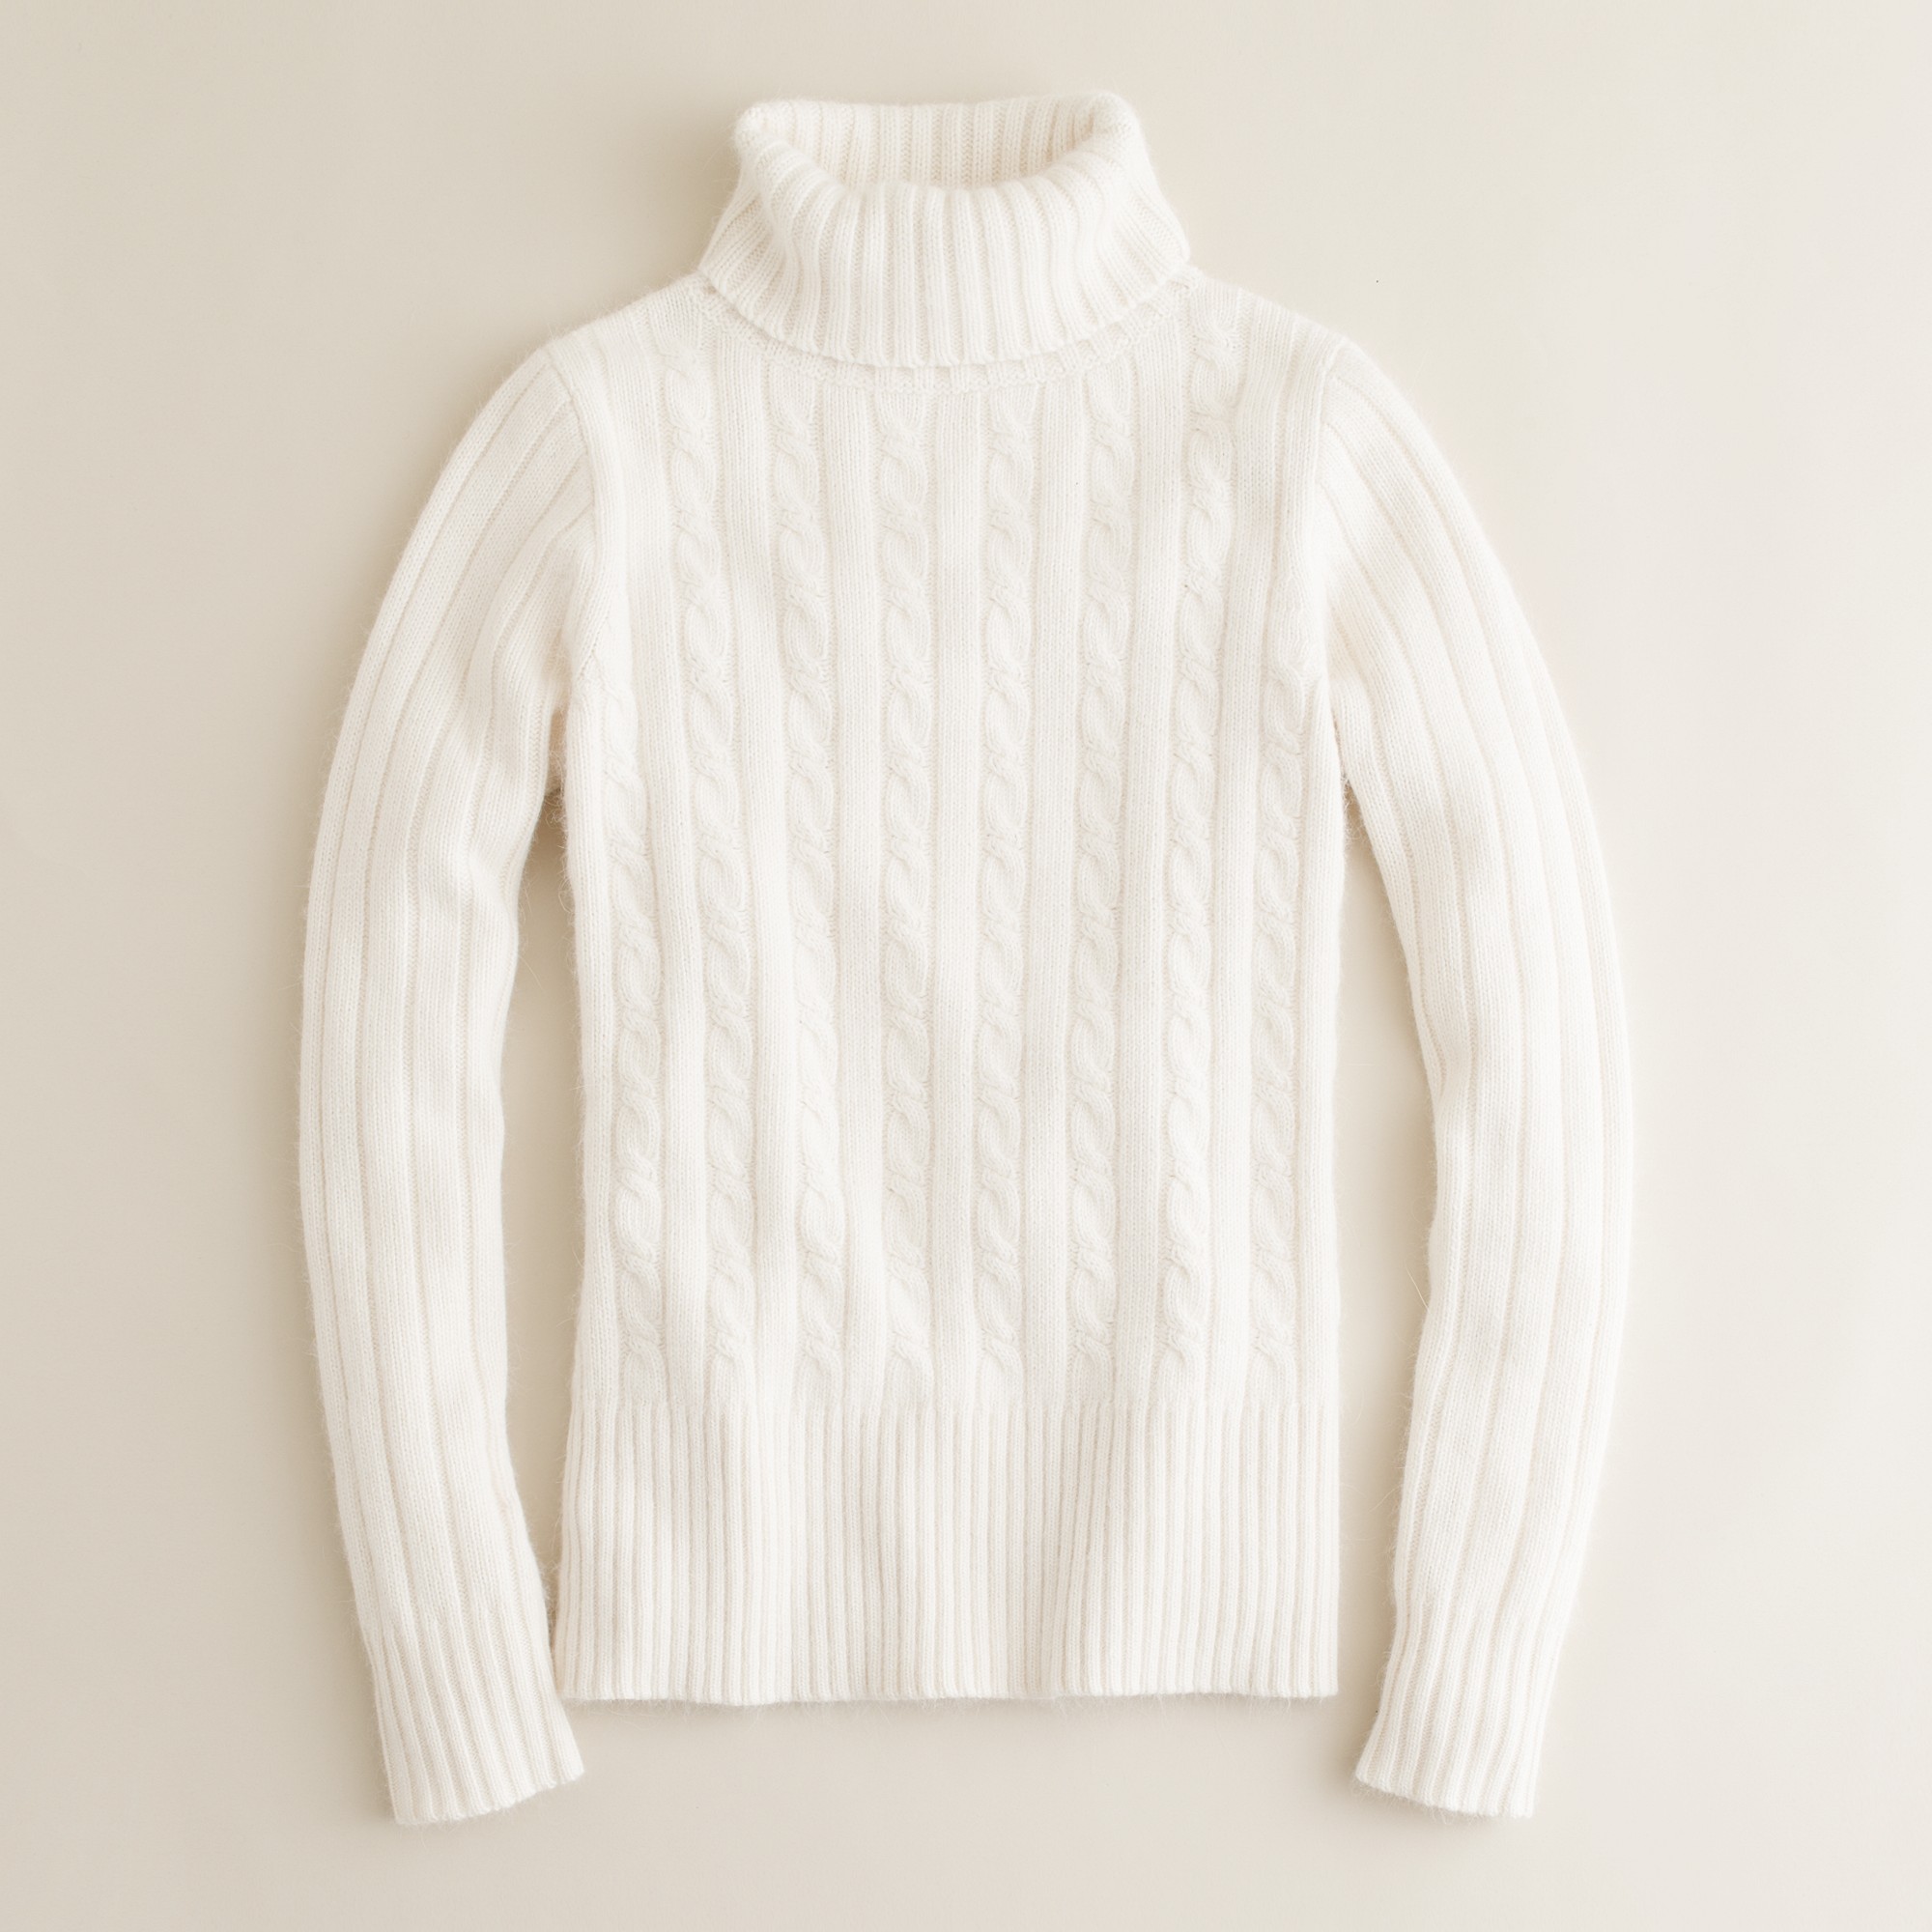 Lyst - J.Crew Cambridge Cable Chunky Turtleneck Sweater in White